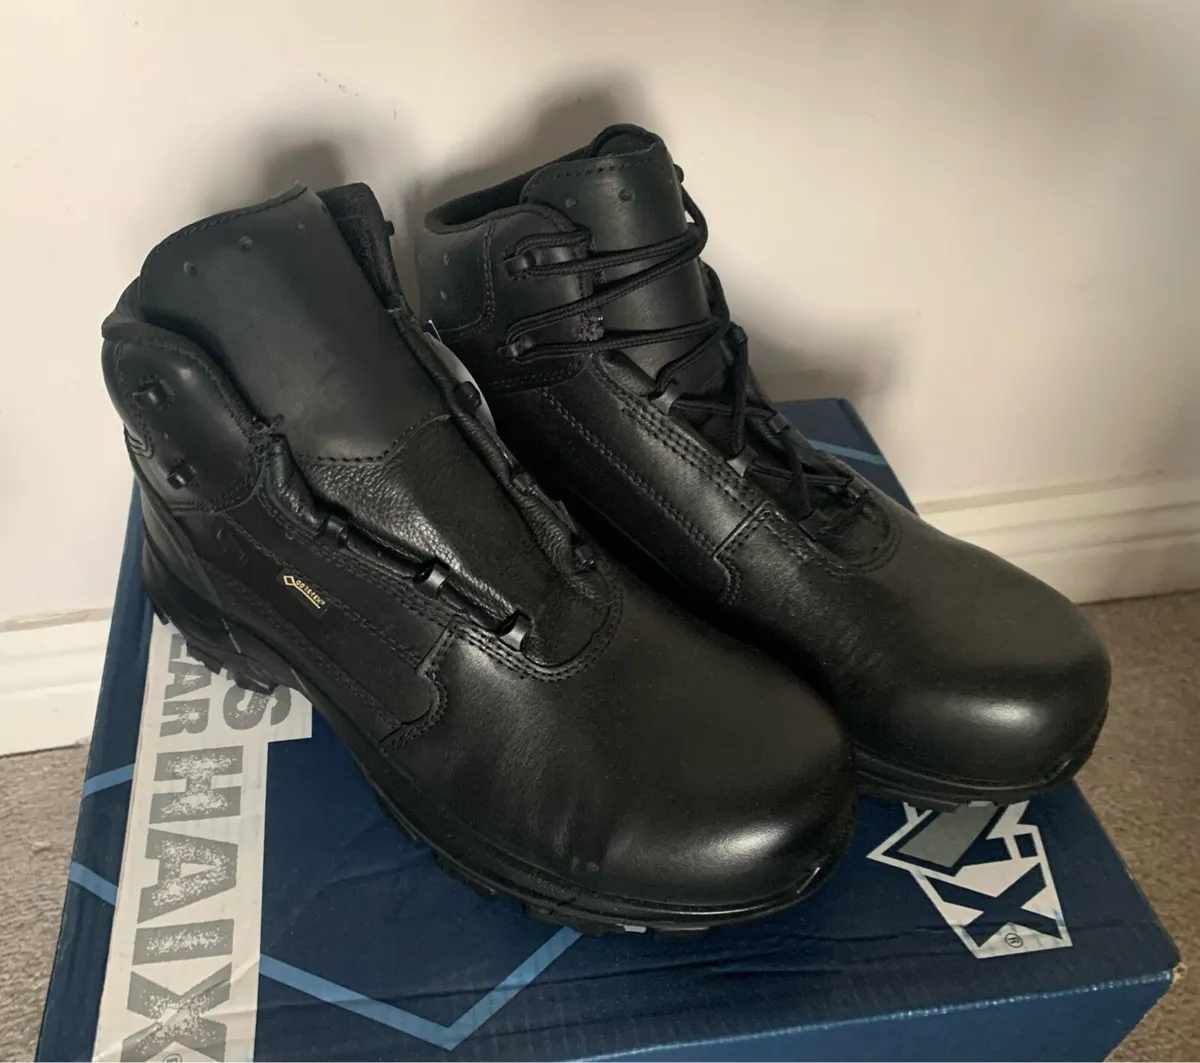 BRAND NEW IN BOX Haix Safety Work Boots: Size 8